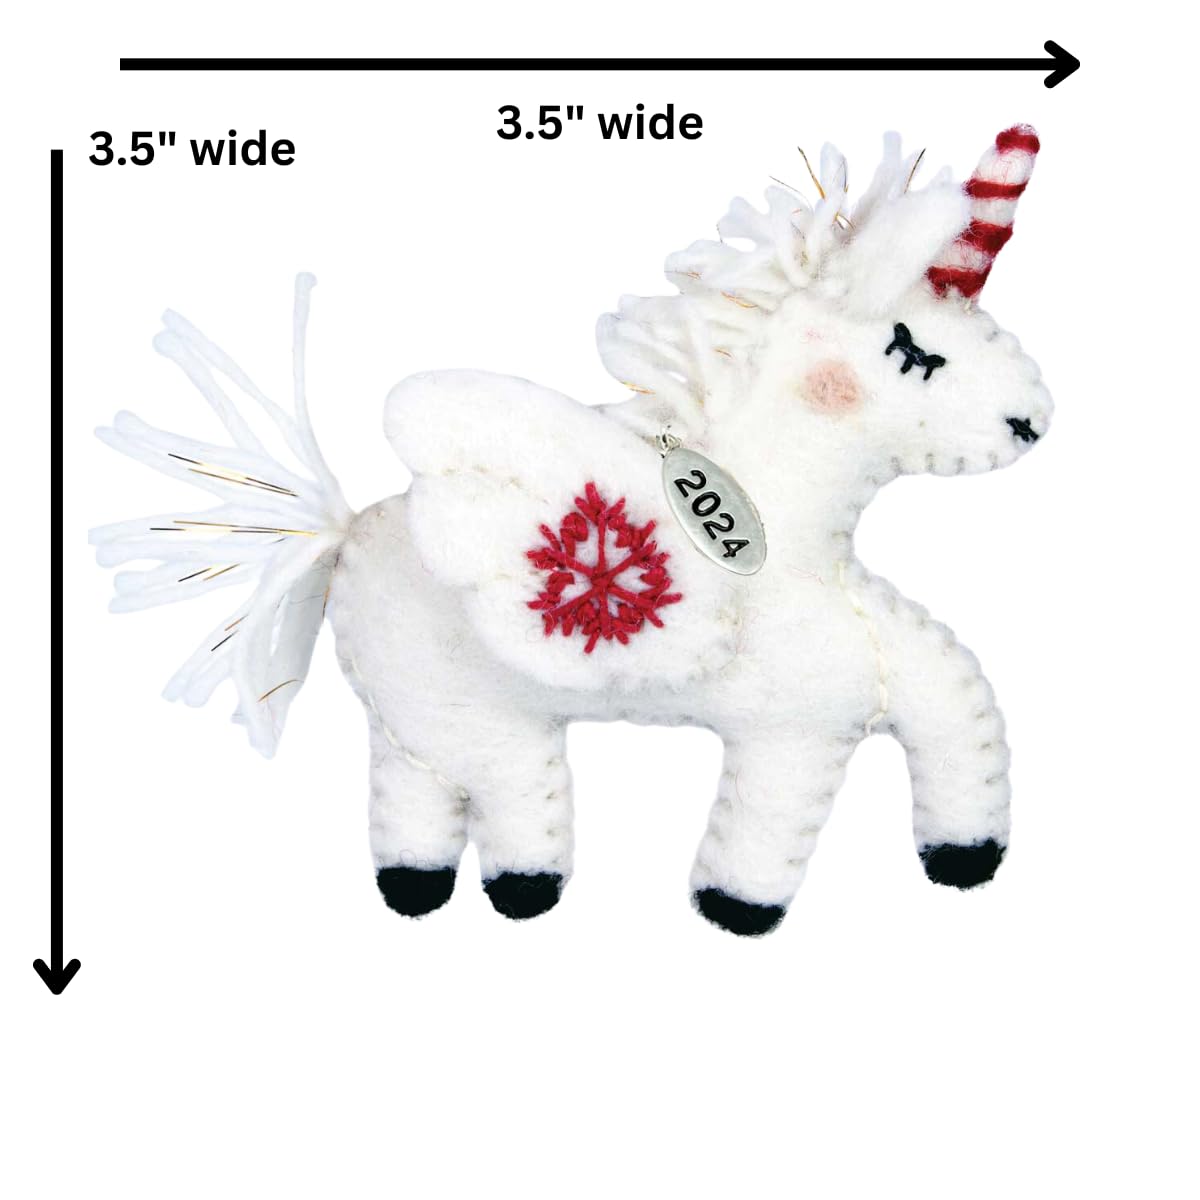 Unicorn Christmas Ornament 2024, Felt Christmas Ornaments, Unicorn Gifts for Women, Unicorn Gifts for Girls - Fair Trade, Hand Felted Made in Nepal - Comes in a Gift Box so It's Ready for Giving